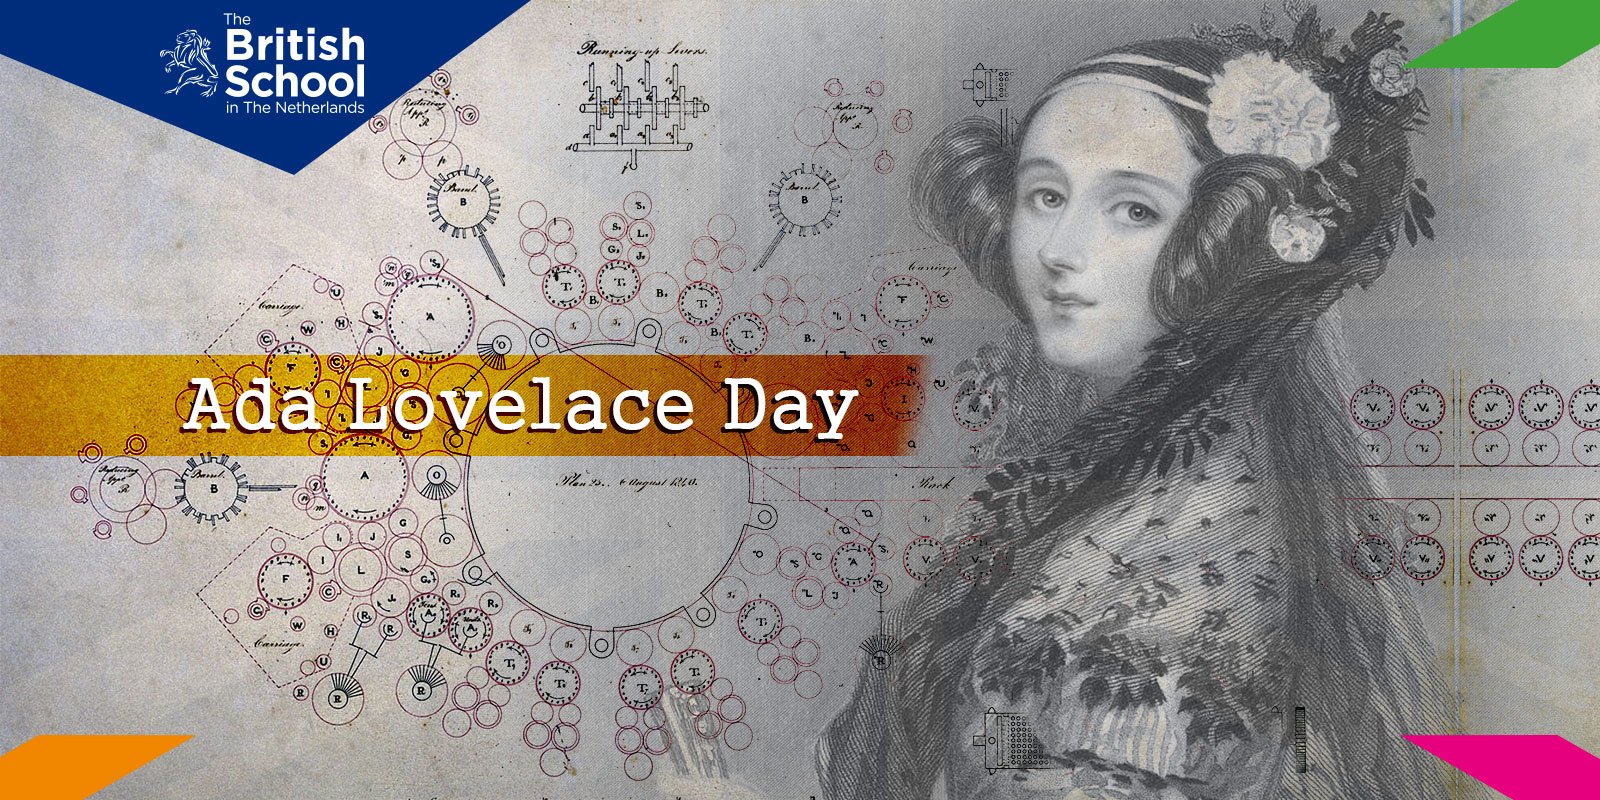 #AdaLovelaceDay is a day to salute the girls and women who are forging their way in the STEM fields. Find out more from @FindingAda #BSNSTEM https://t.co/5wAmbOOKD3